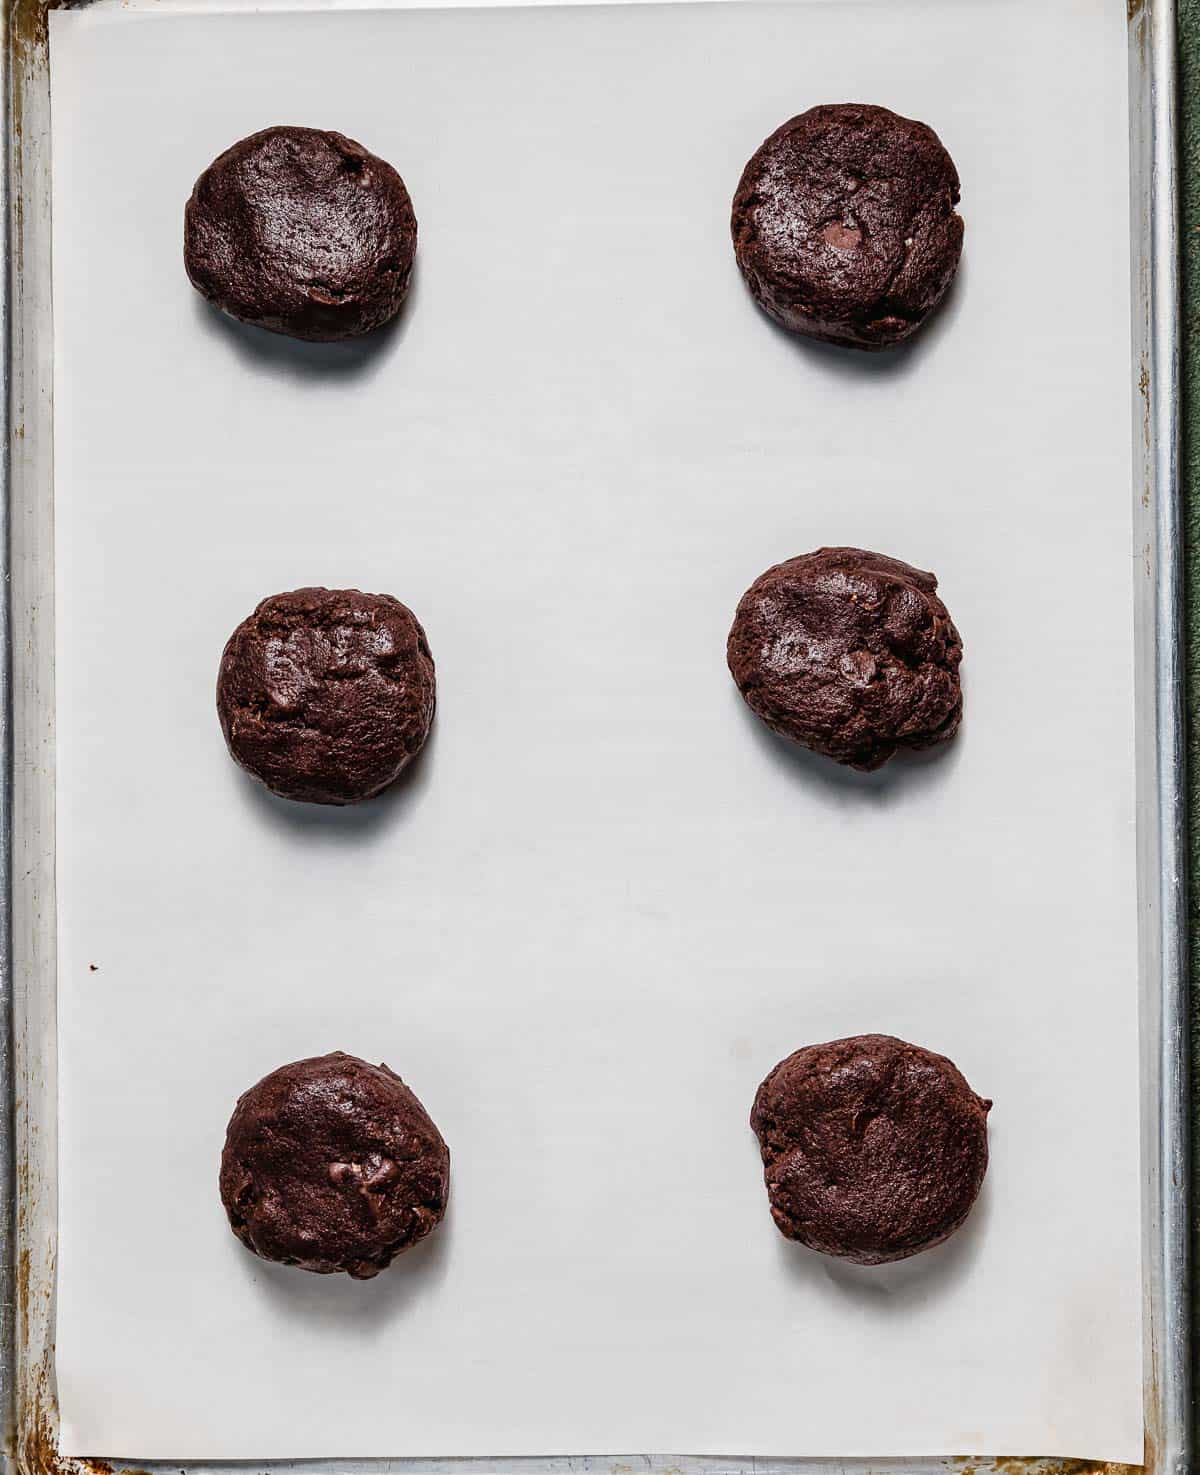 Six chocolate cookie dough balls on a white parchment lined baking sheet.